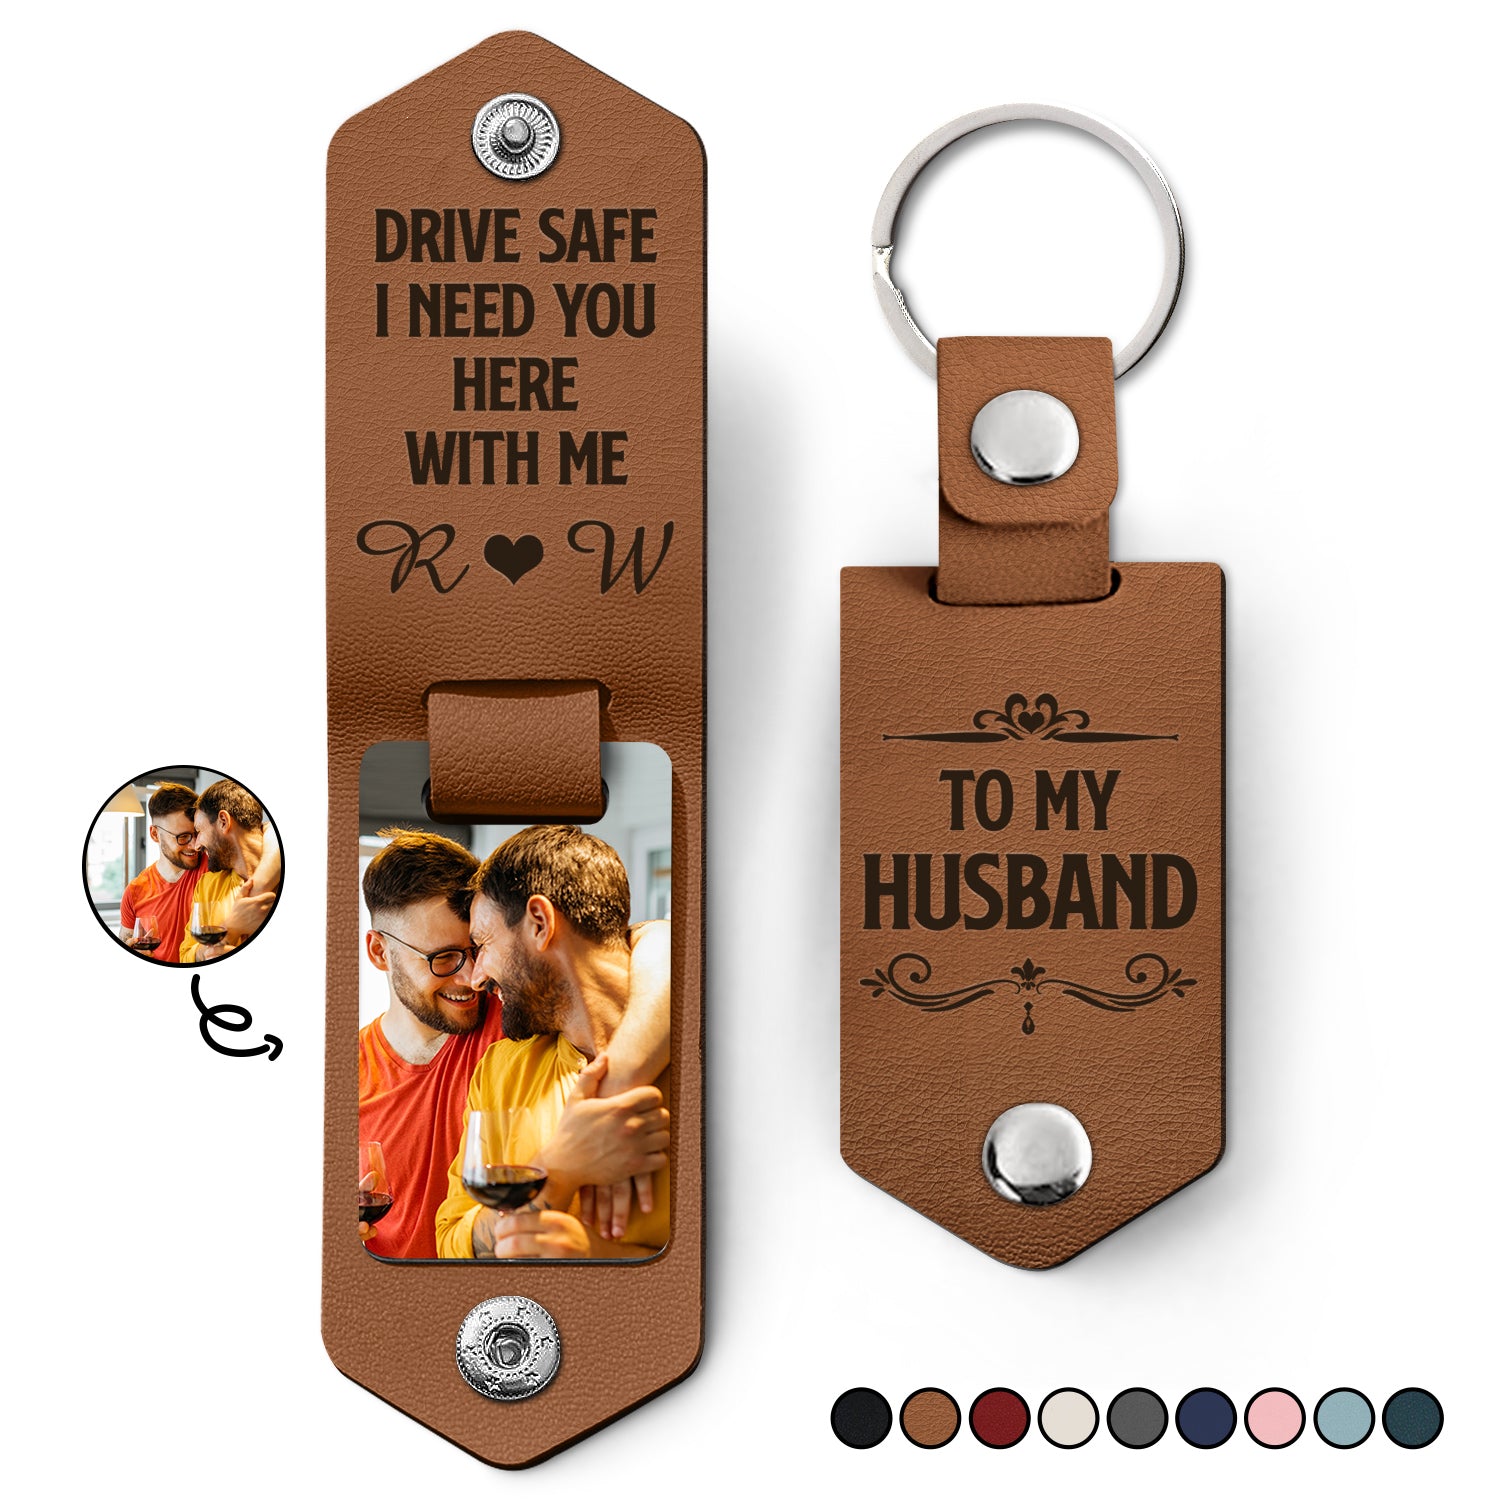 Custom Photo Drive Safe I Need You Here With Me - Loving, Anniversary Gift For Spouse, Husband, Wife - Personalized Leather Photo Keychain